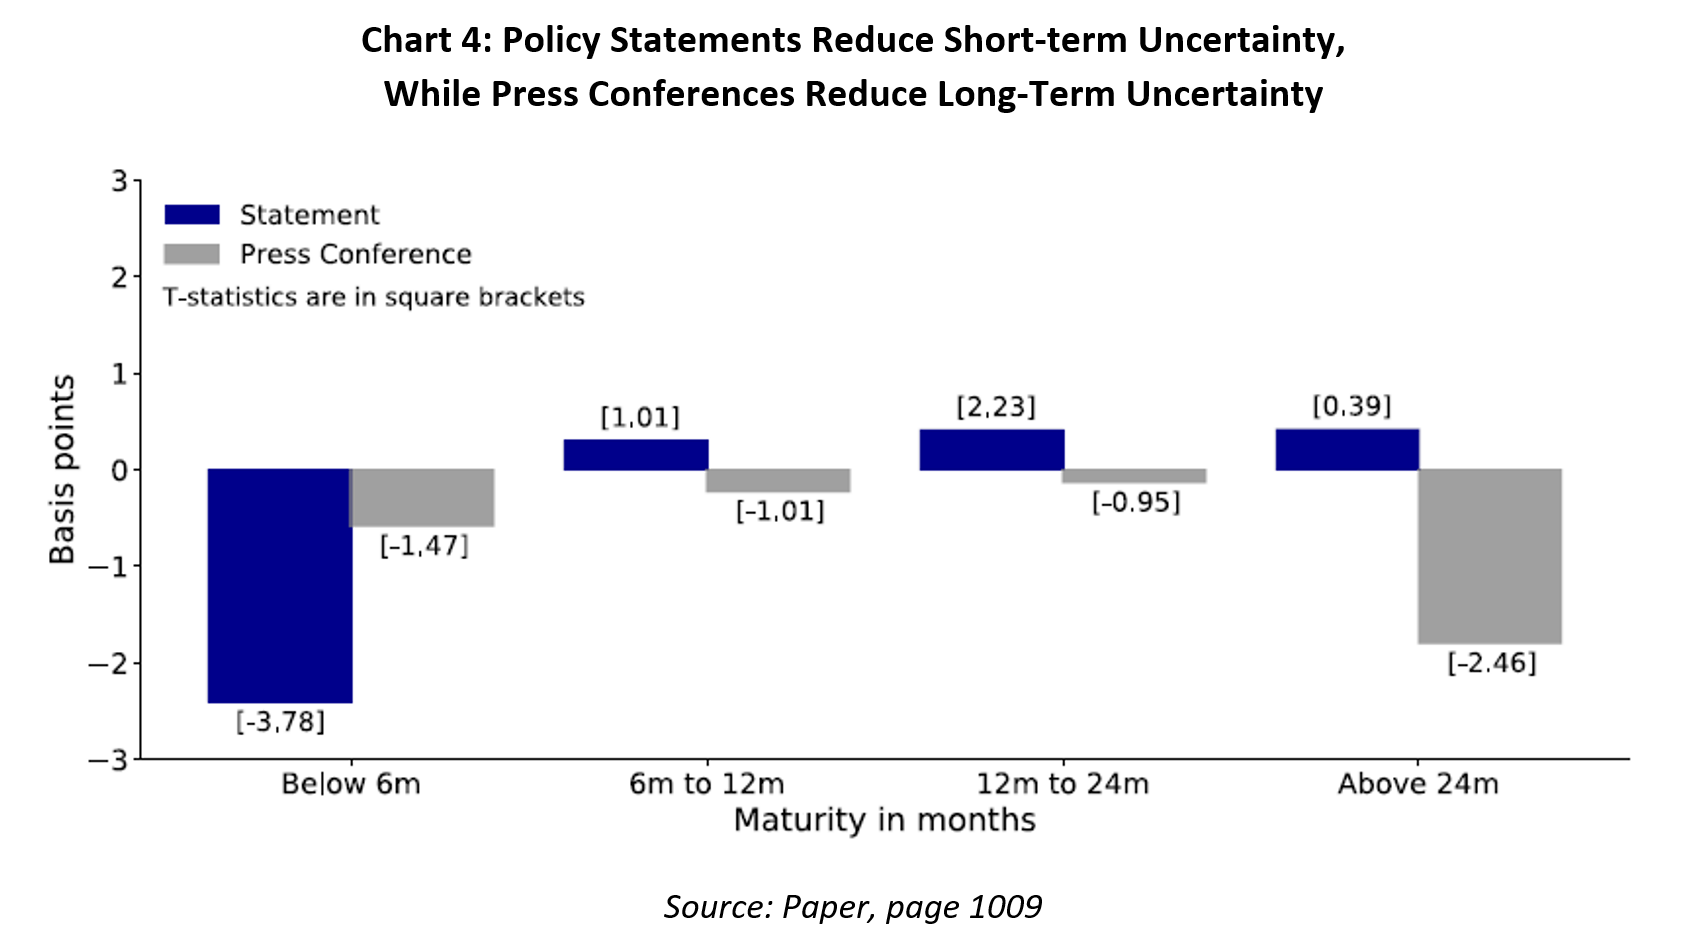 chart 4: policy statements reduce short term uncertainty, while press conferences reduce long-term uncertainty